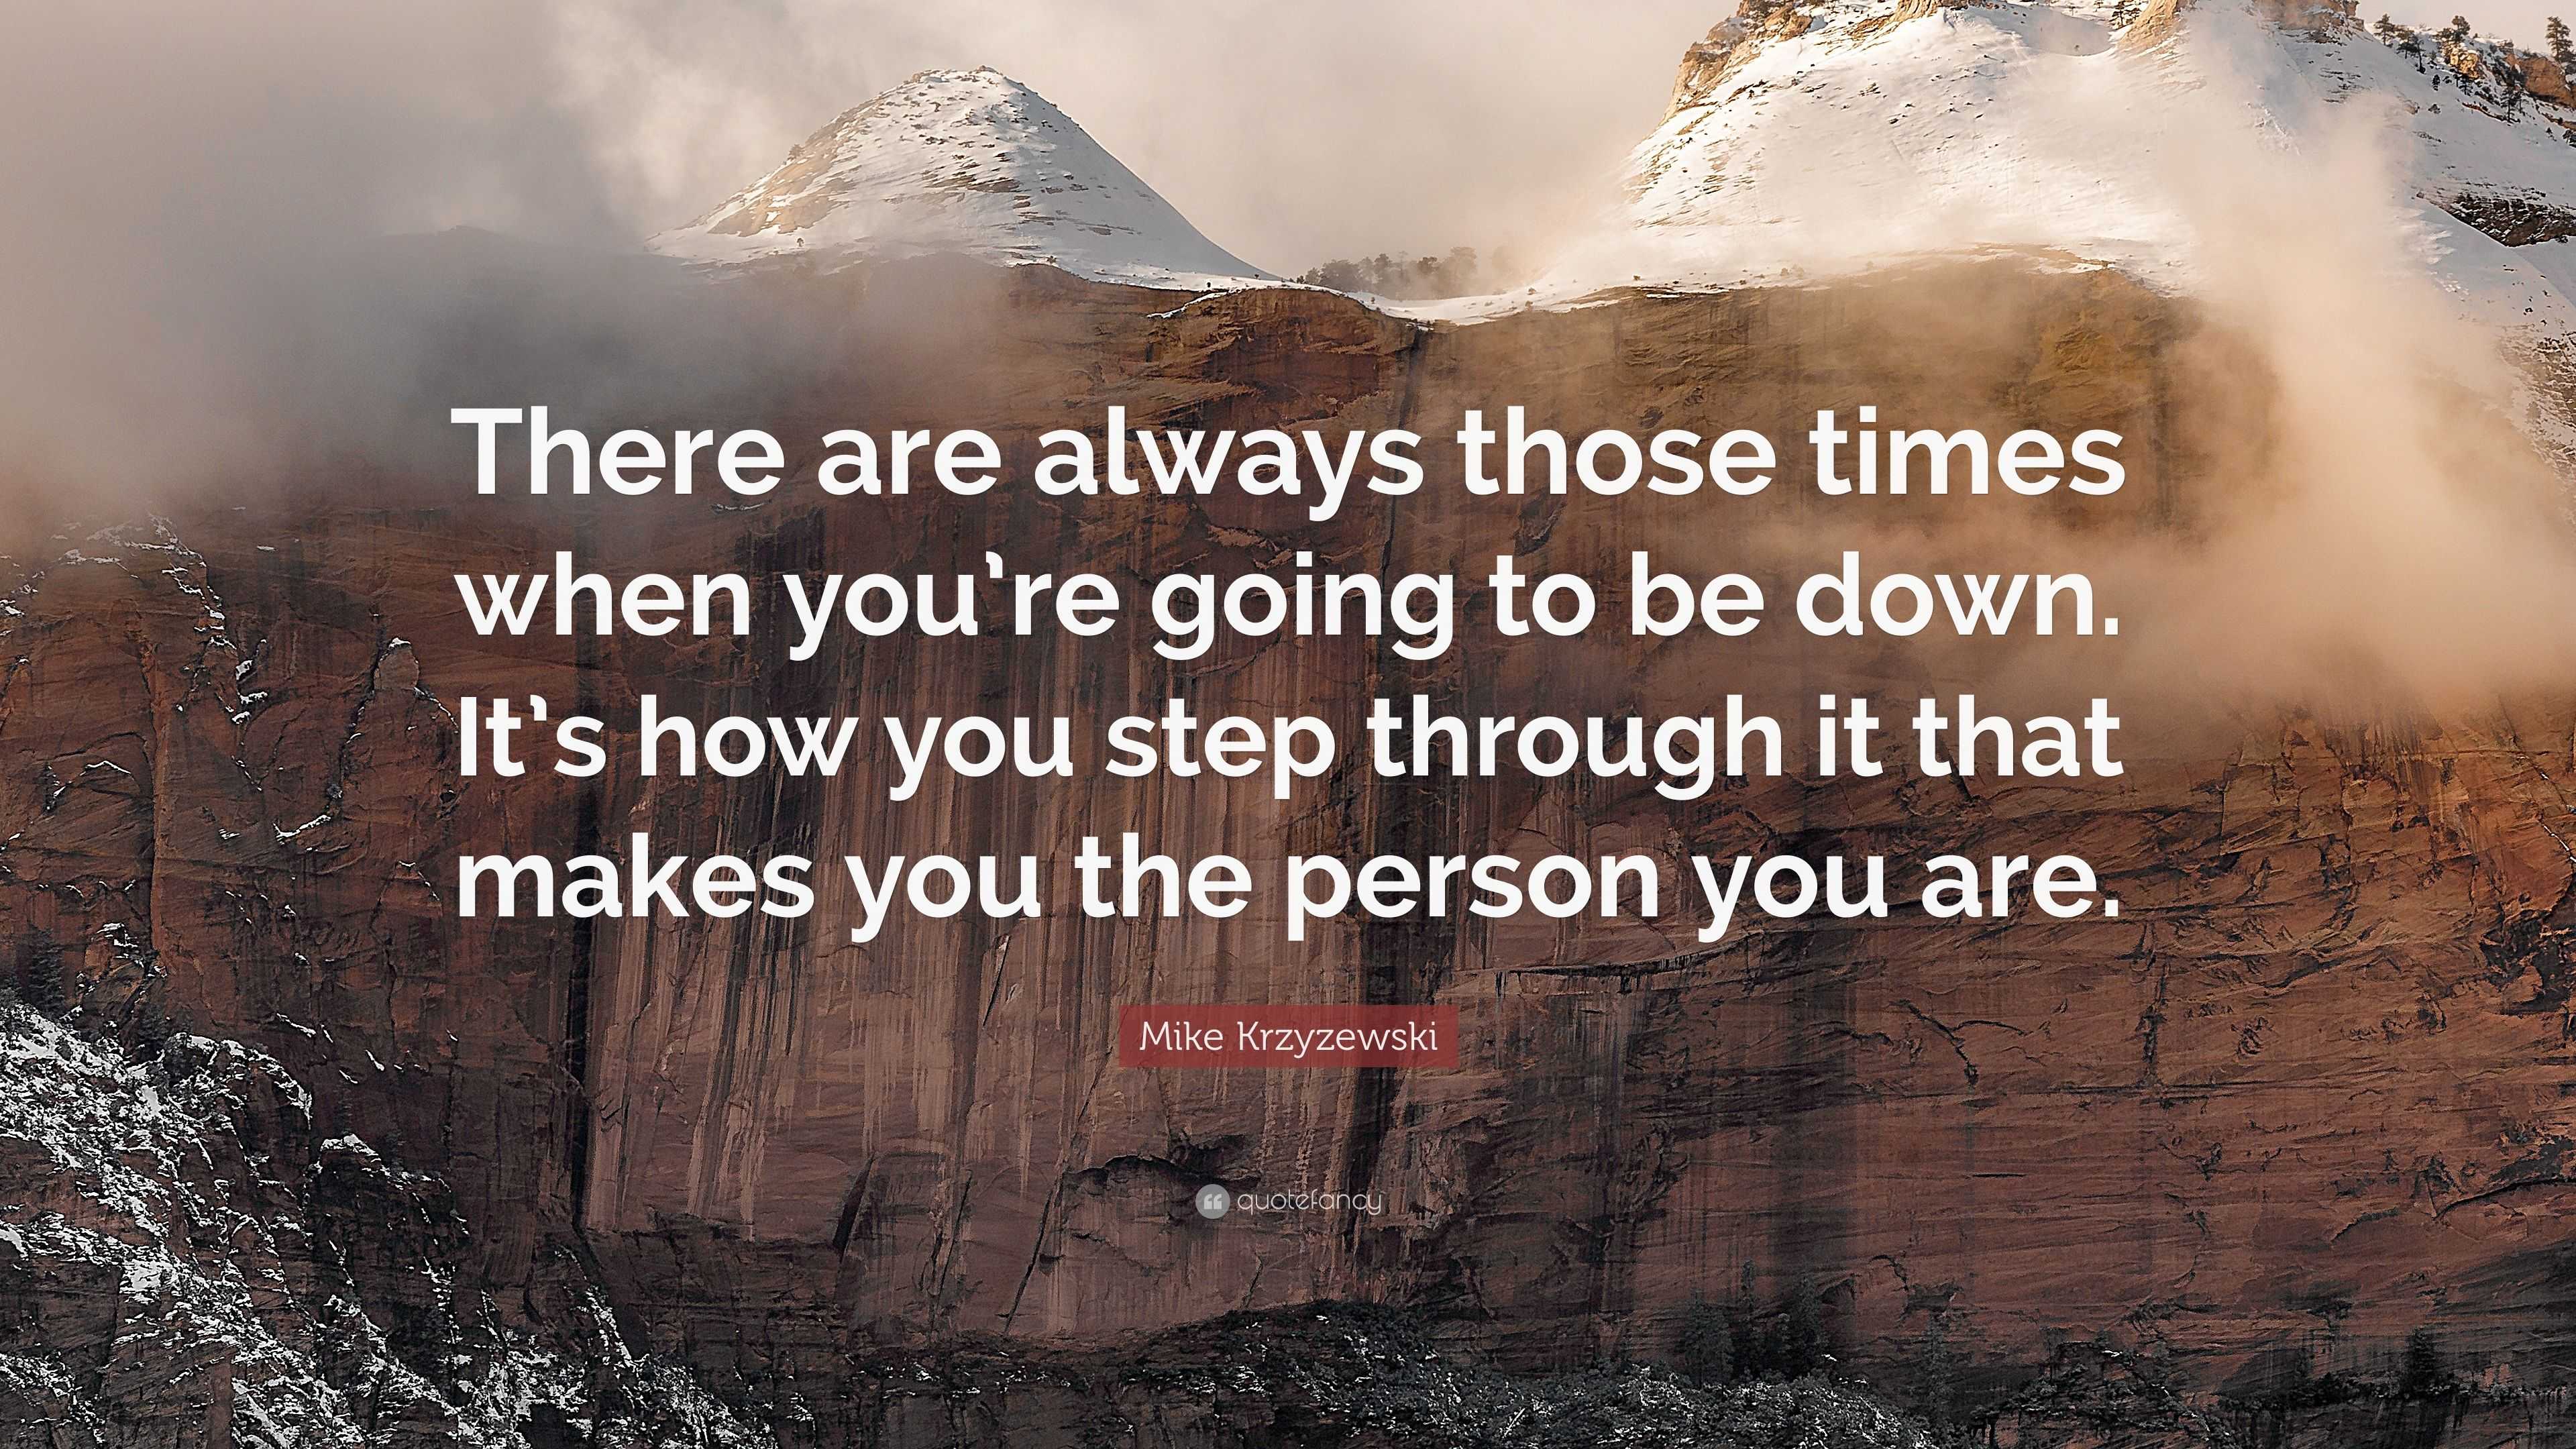 Mike Krzyzewski Quote: “There are always those times when you’re going ...